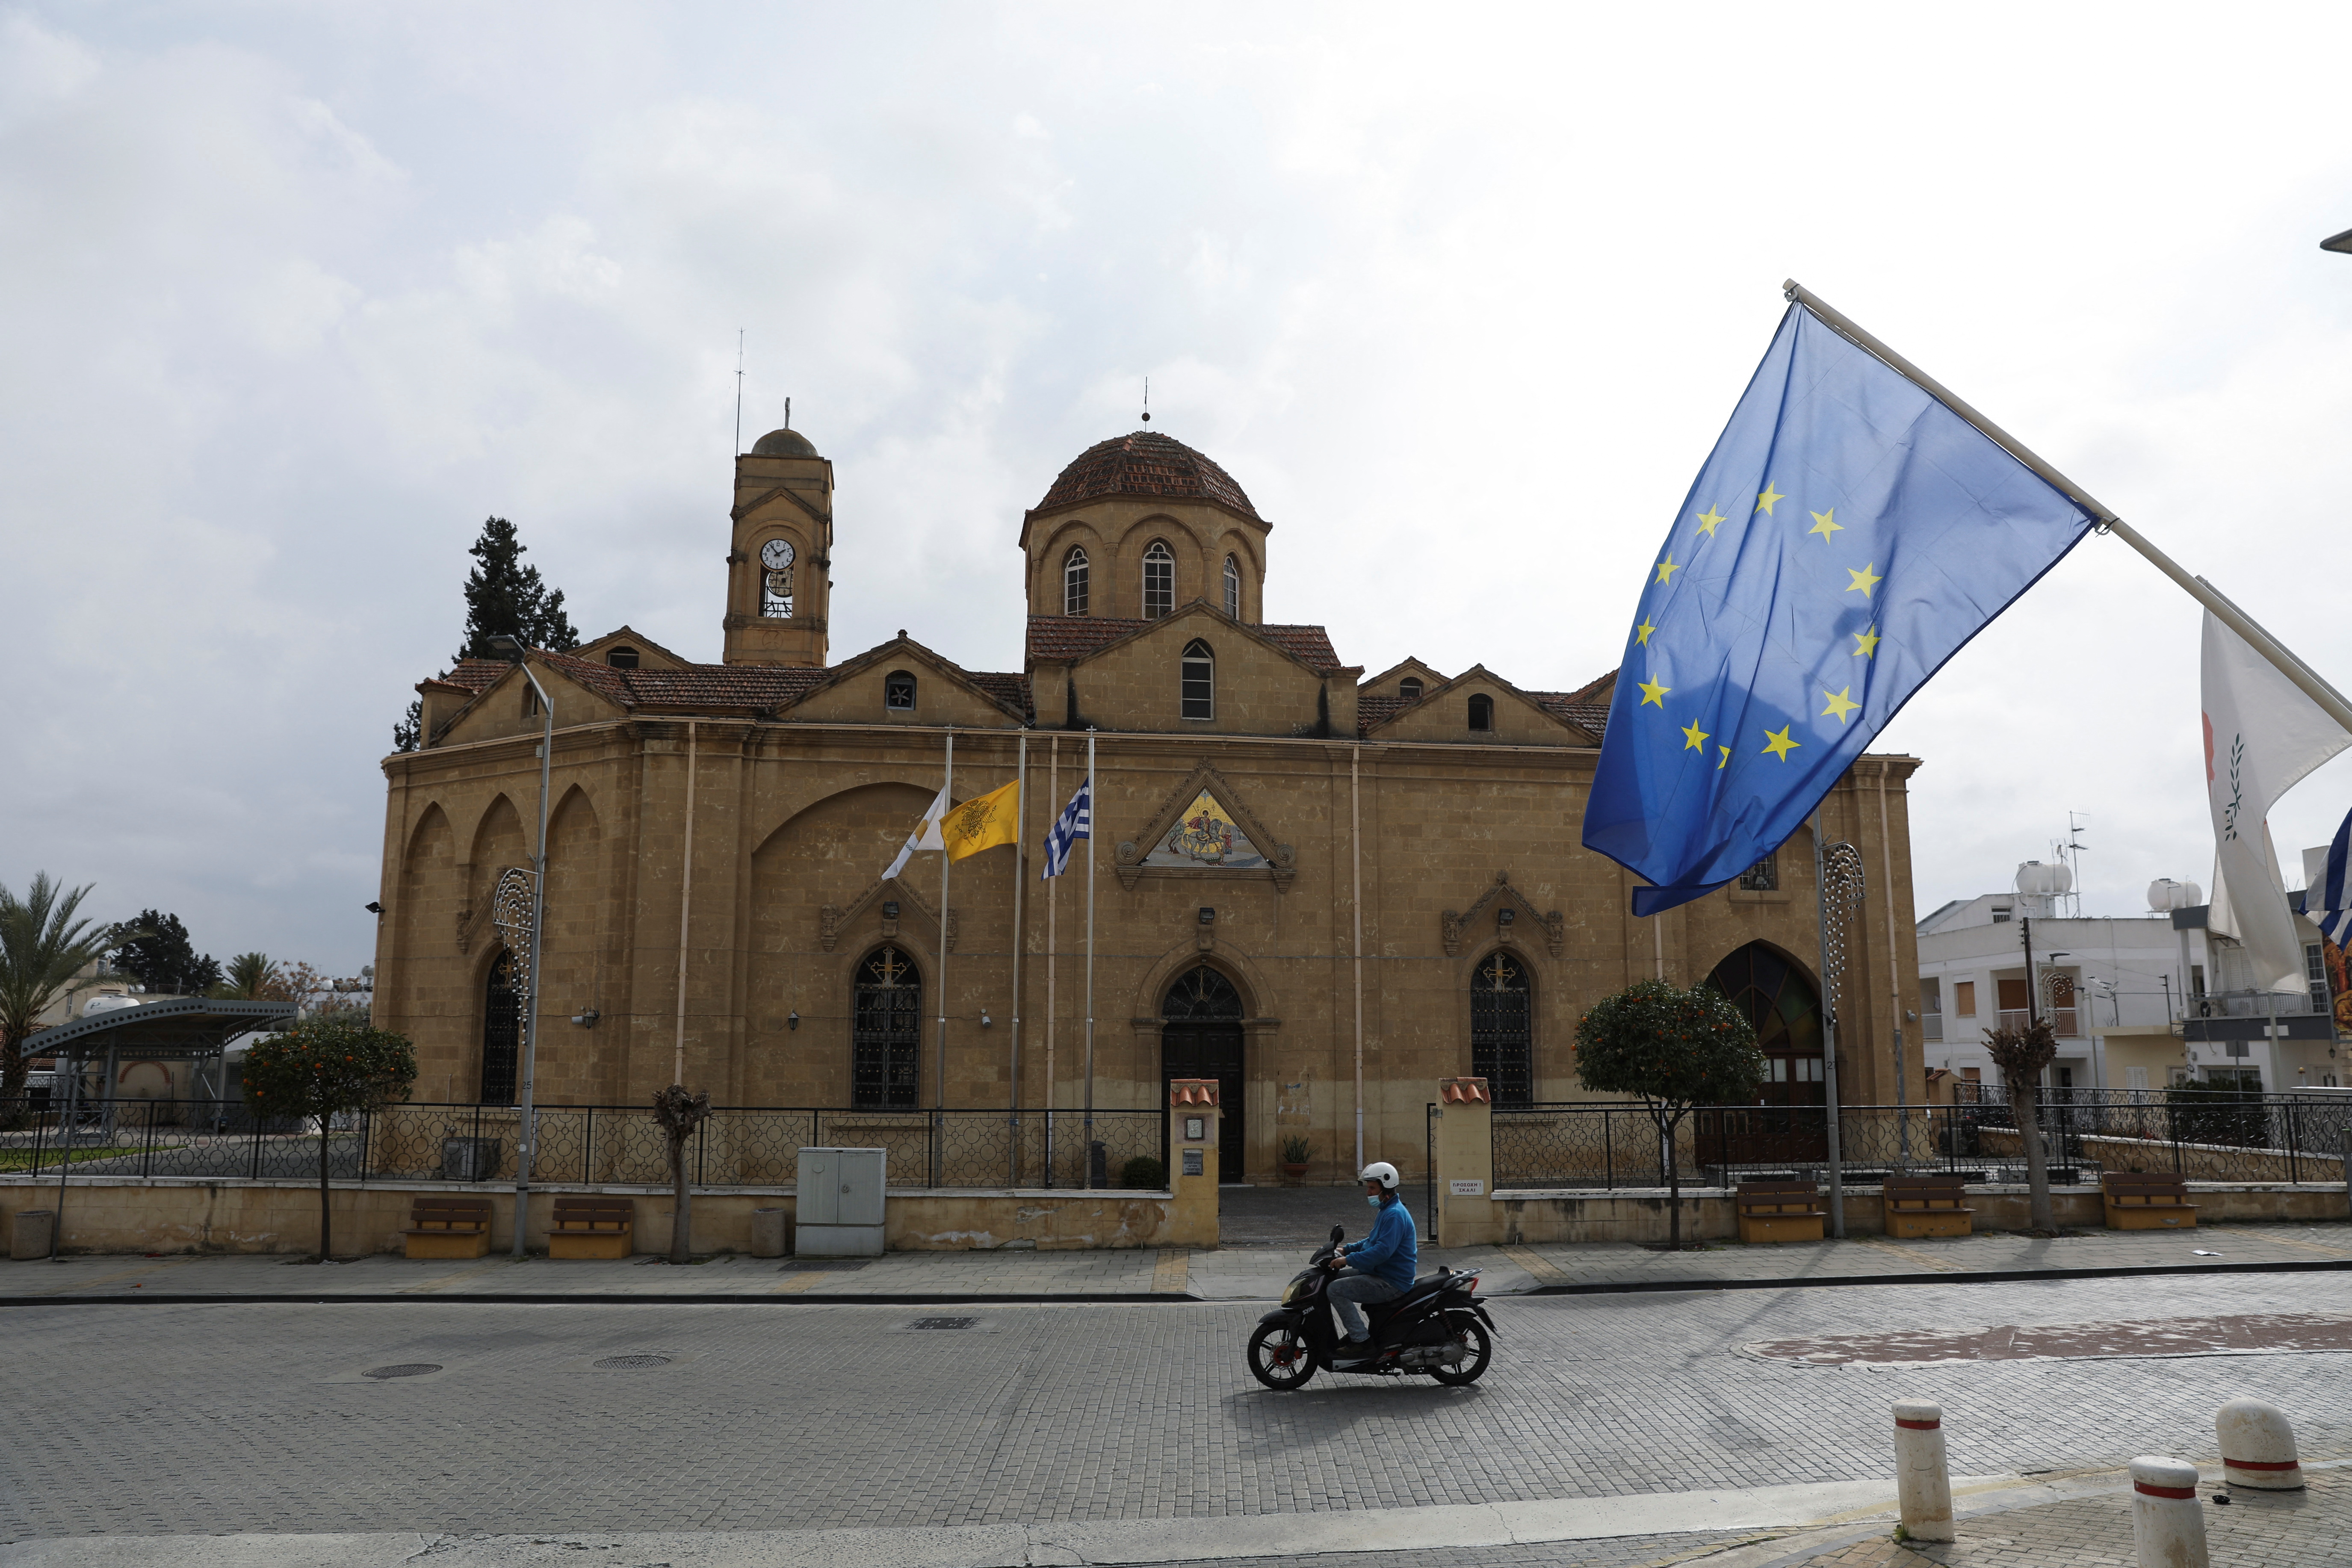 A man rides his motorcycle in front of the church of St. George in the Ayios Dhometios suburb of Nicosia